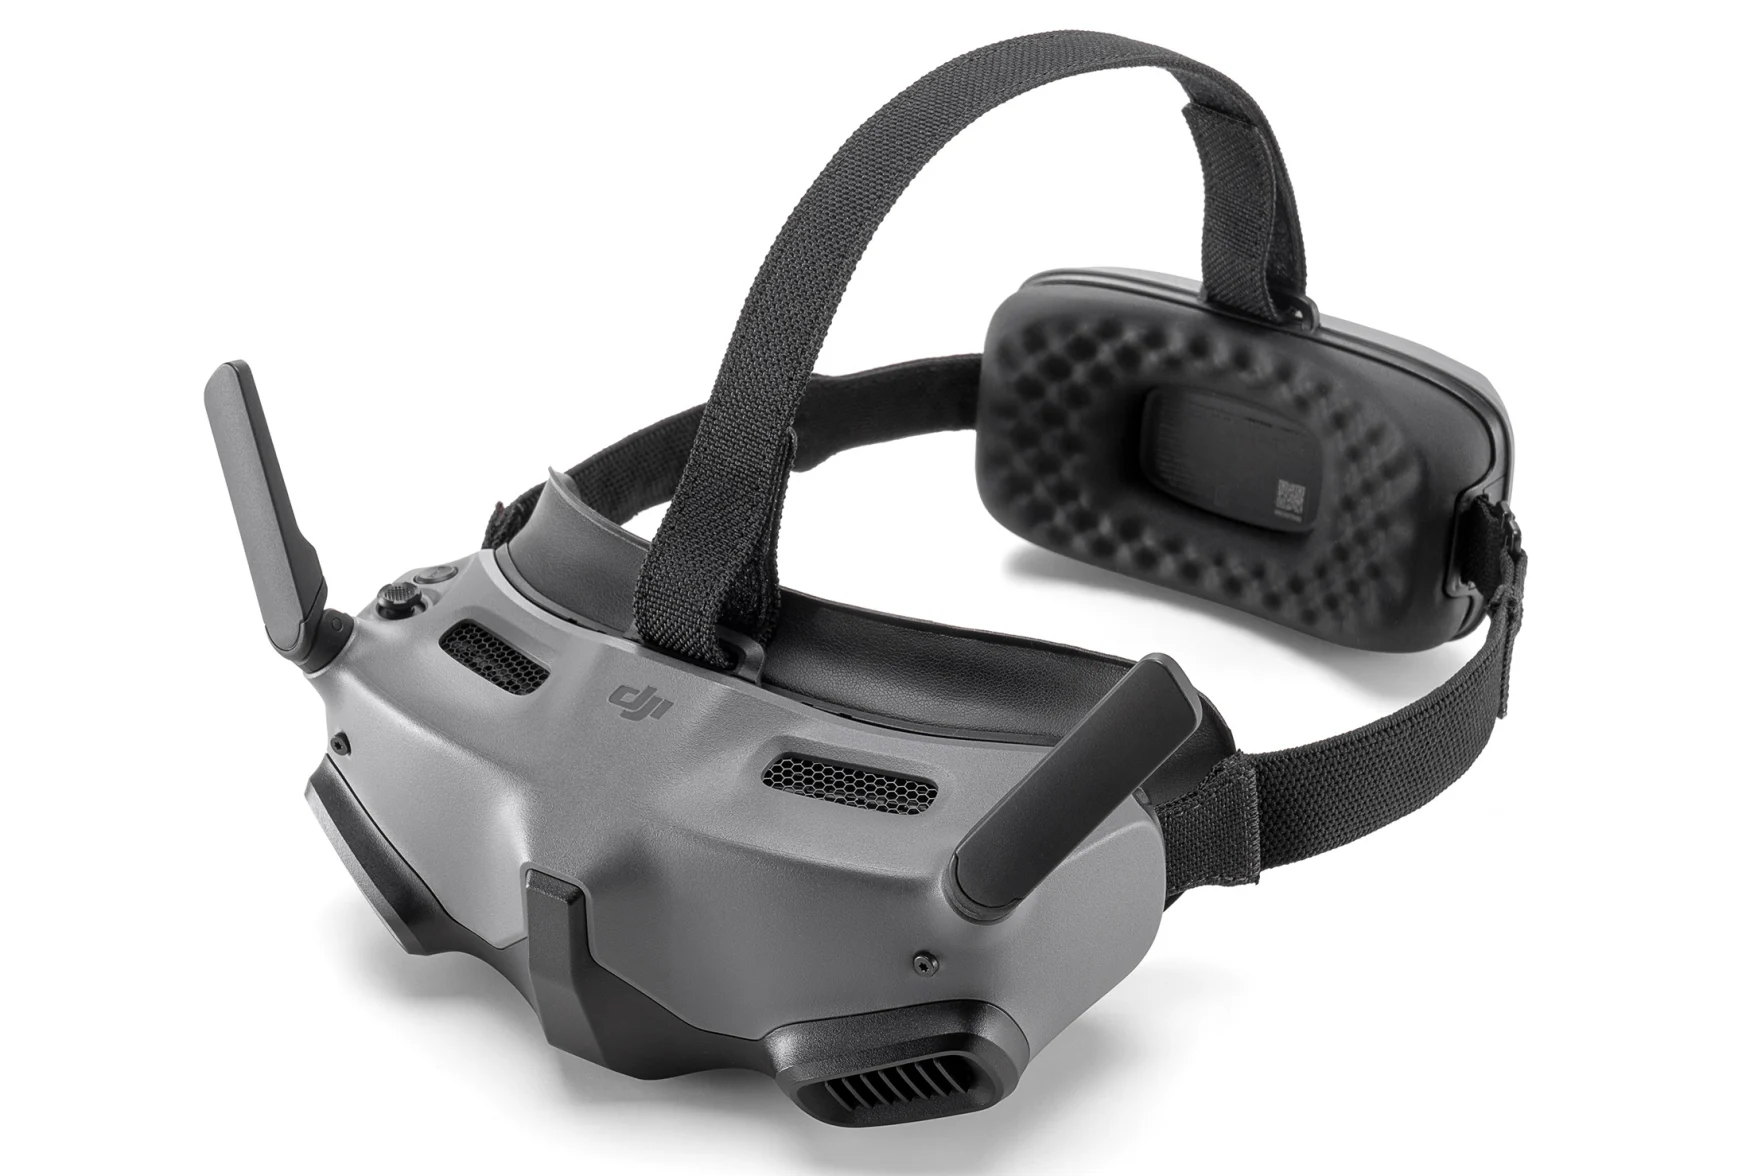 DJI's Goggles Integra have an integrated battery for improved ergonomics